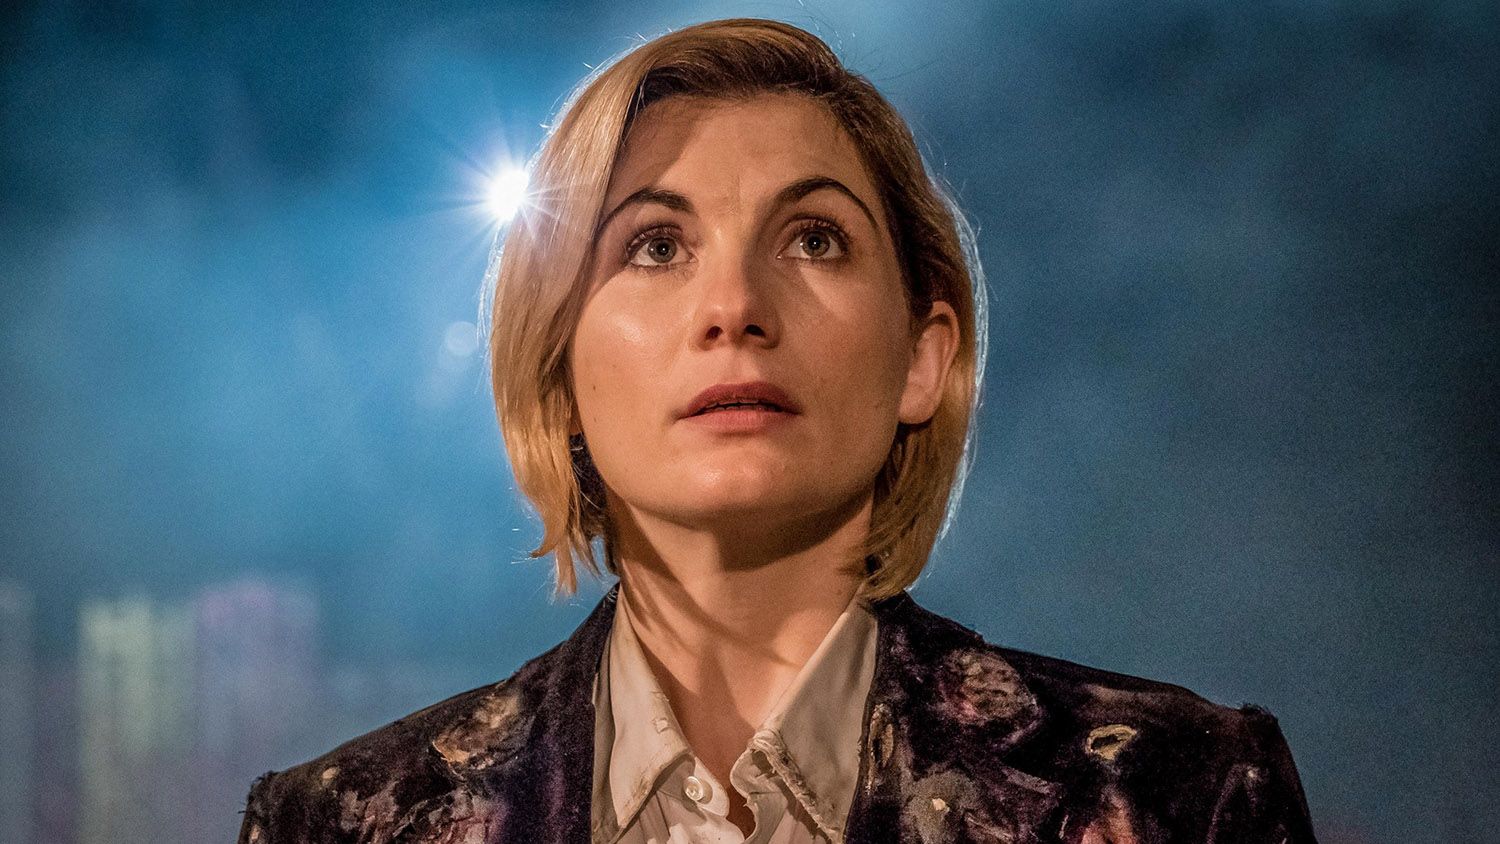 Doctor Who show bosses reportedly scrapping this year's Christmas episode